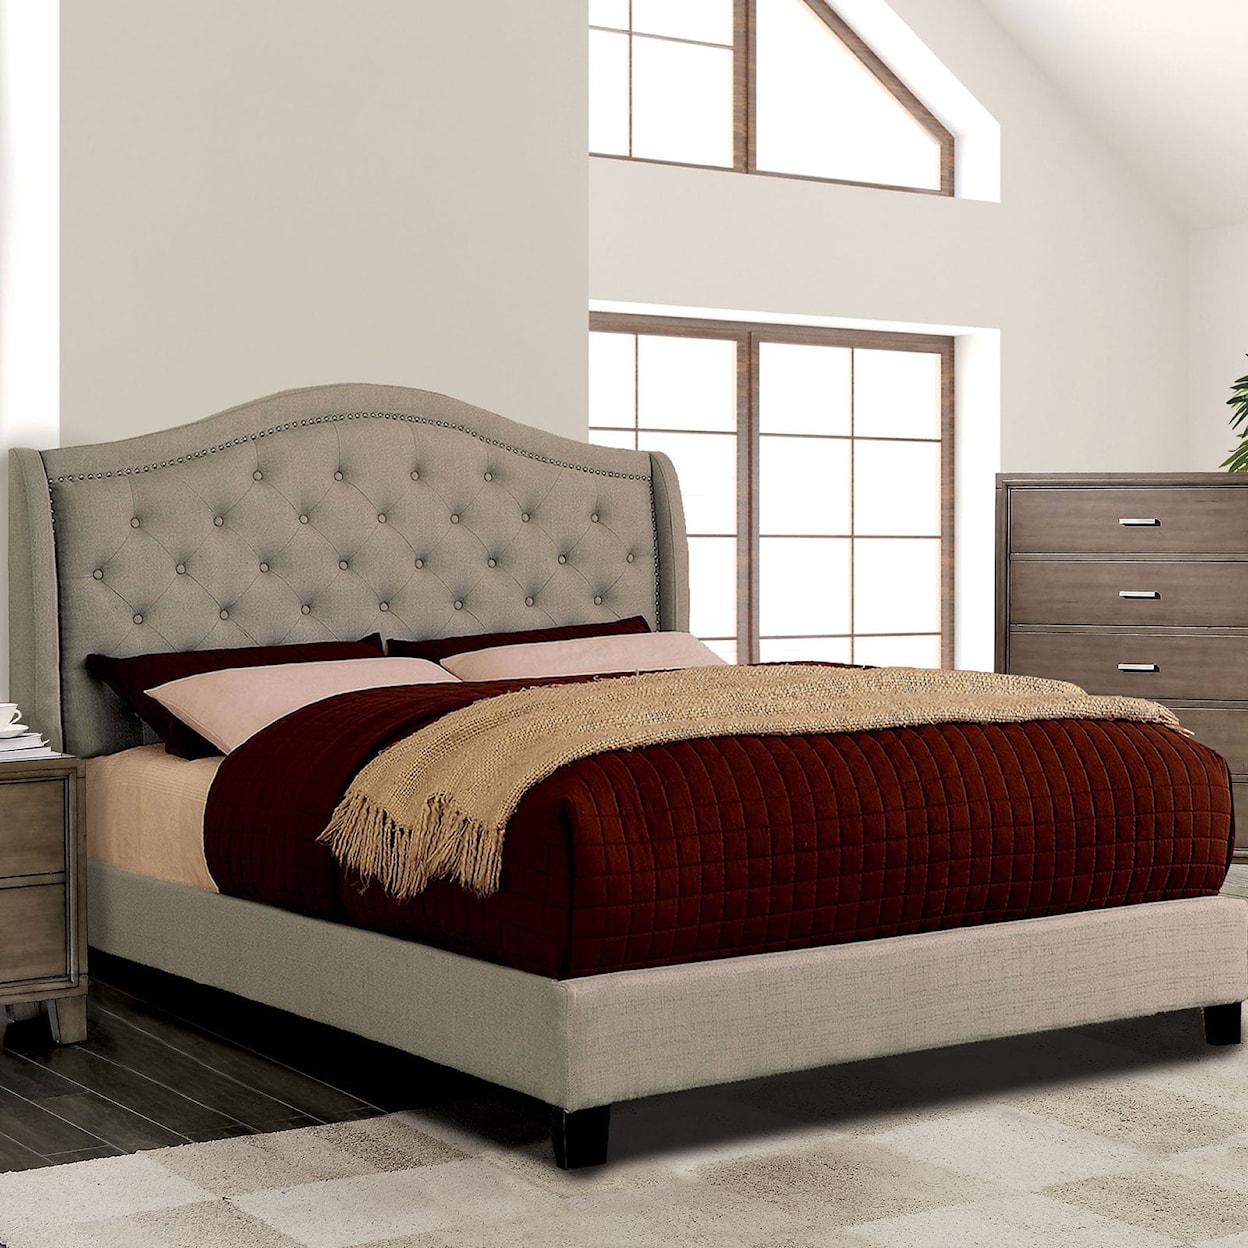 FUSA Carly Queen Bed, Warm Gray